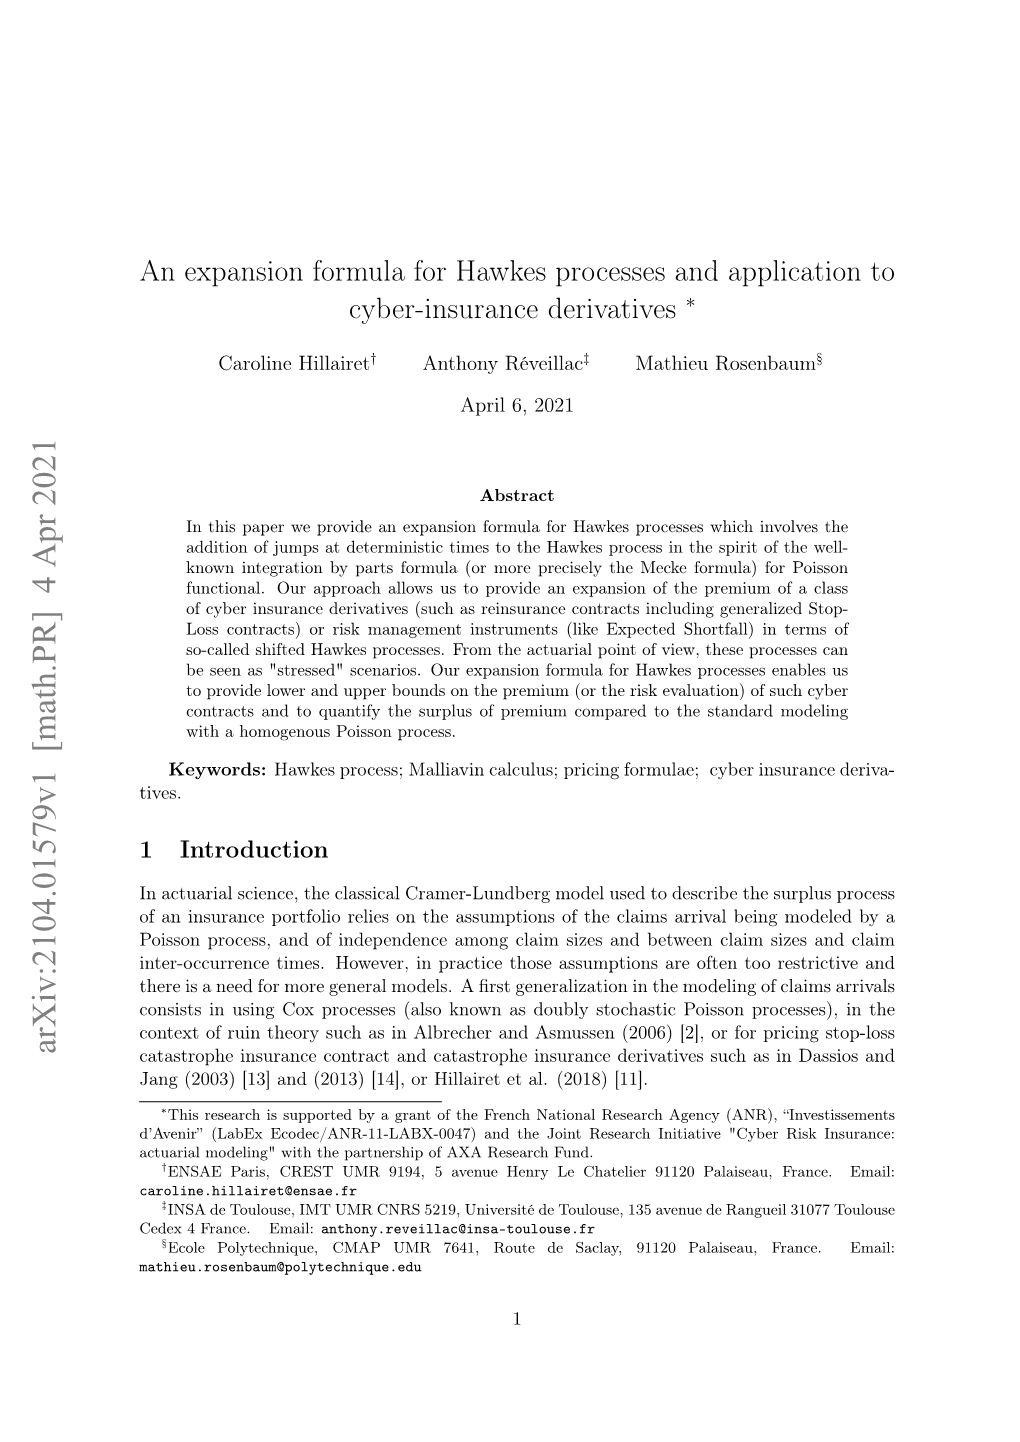 An Expansion Formula for Hawkes Processes and Application to Cyber-Insurance Derivatives ∗